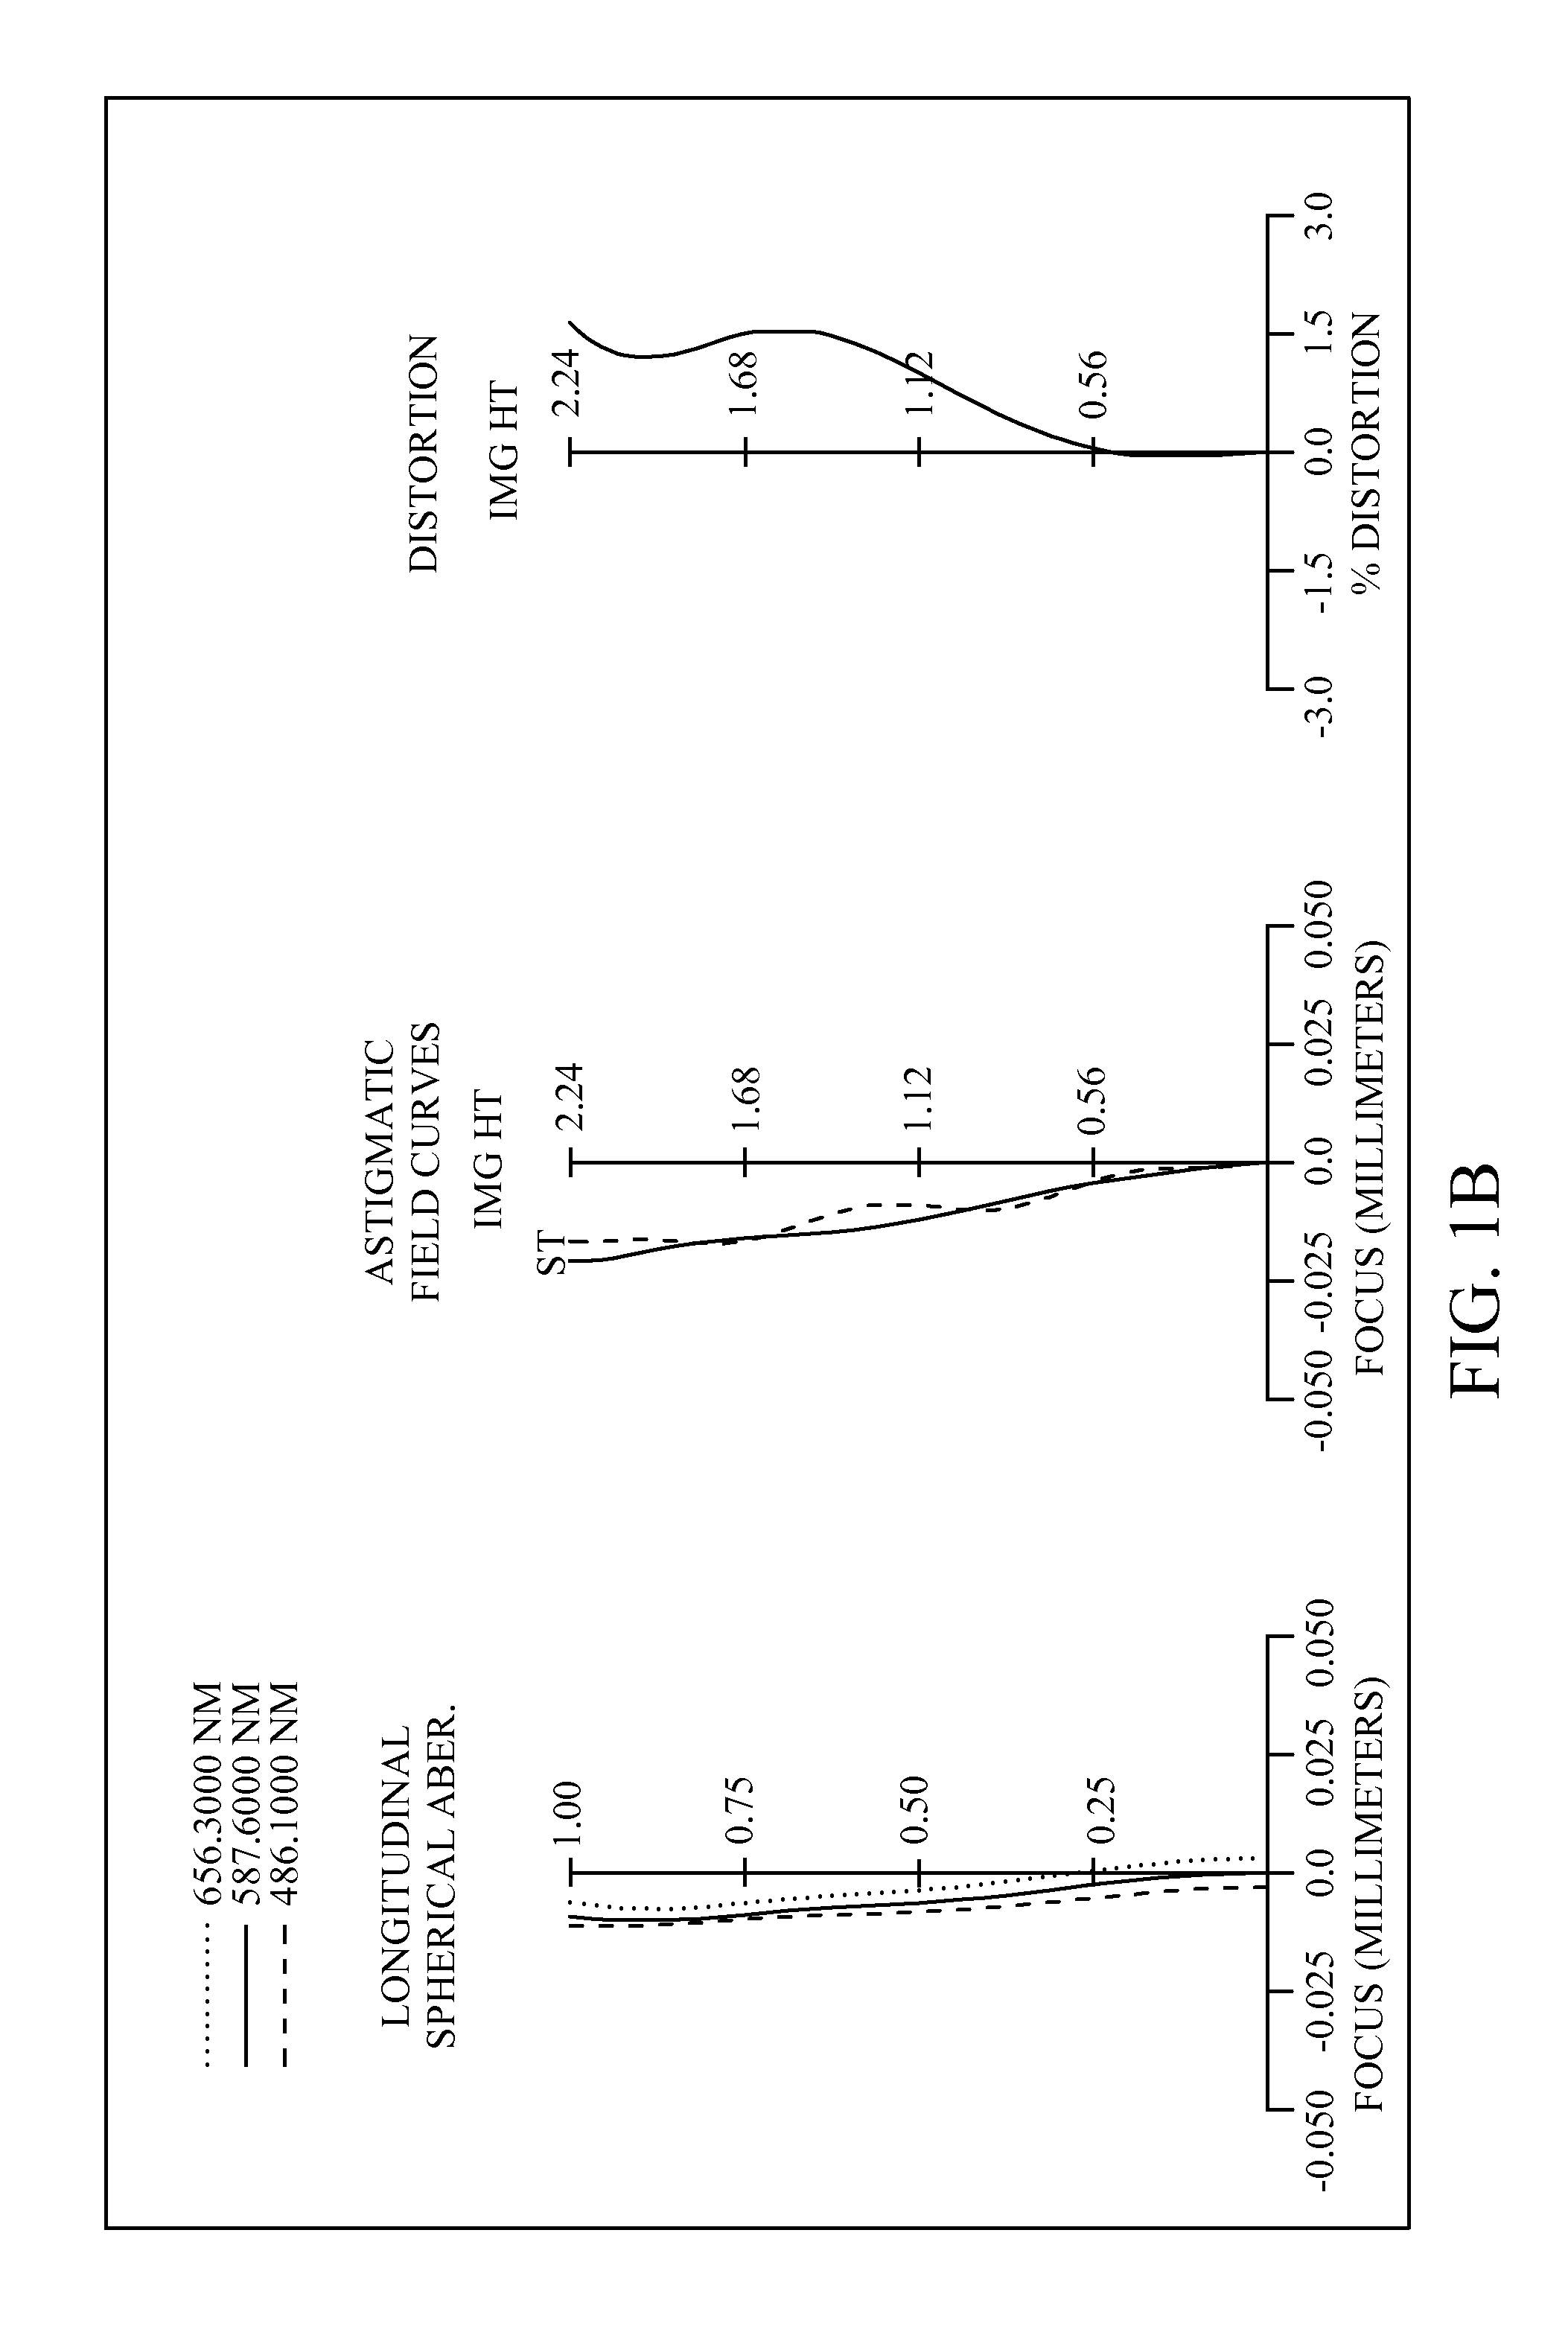 Optical system for imaging pickup